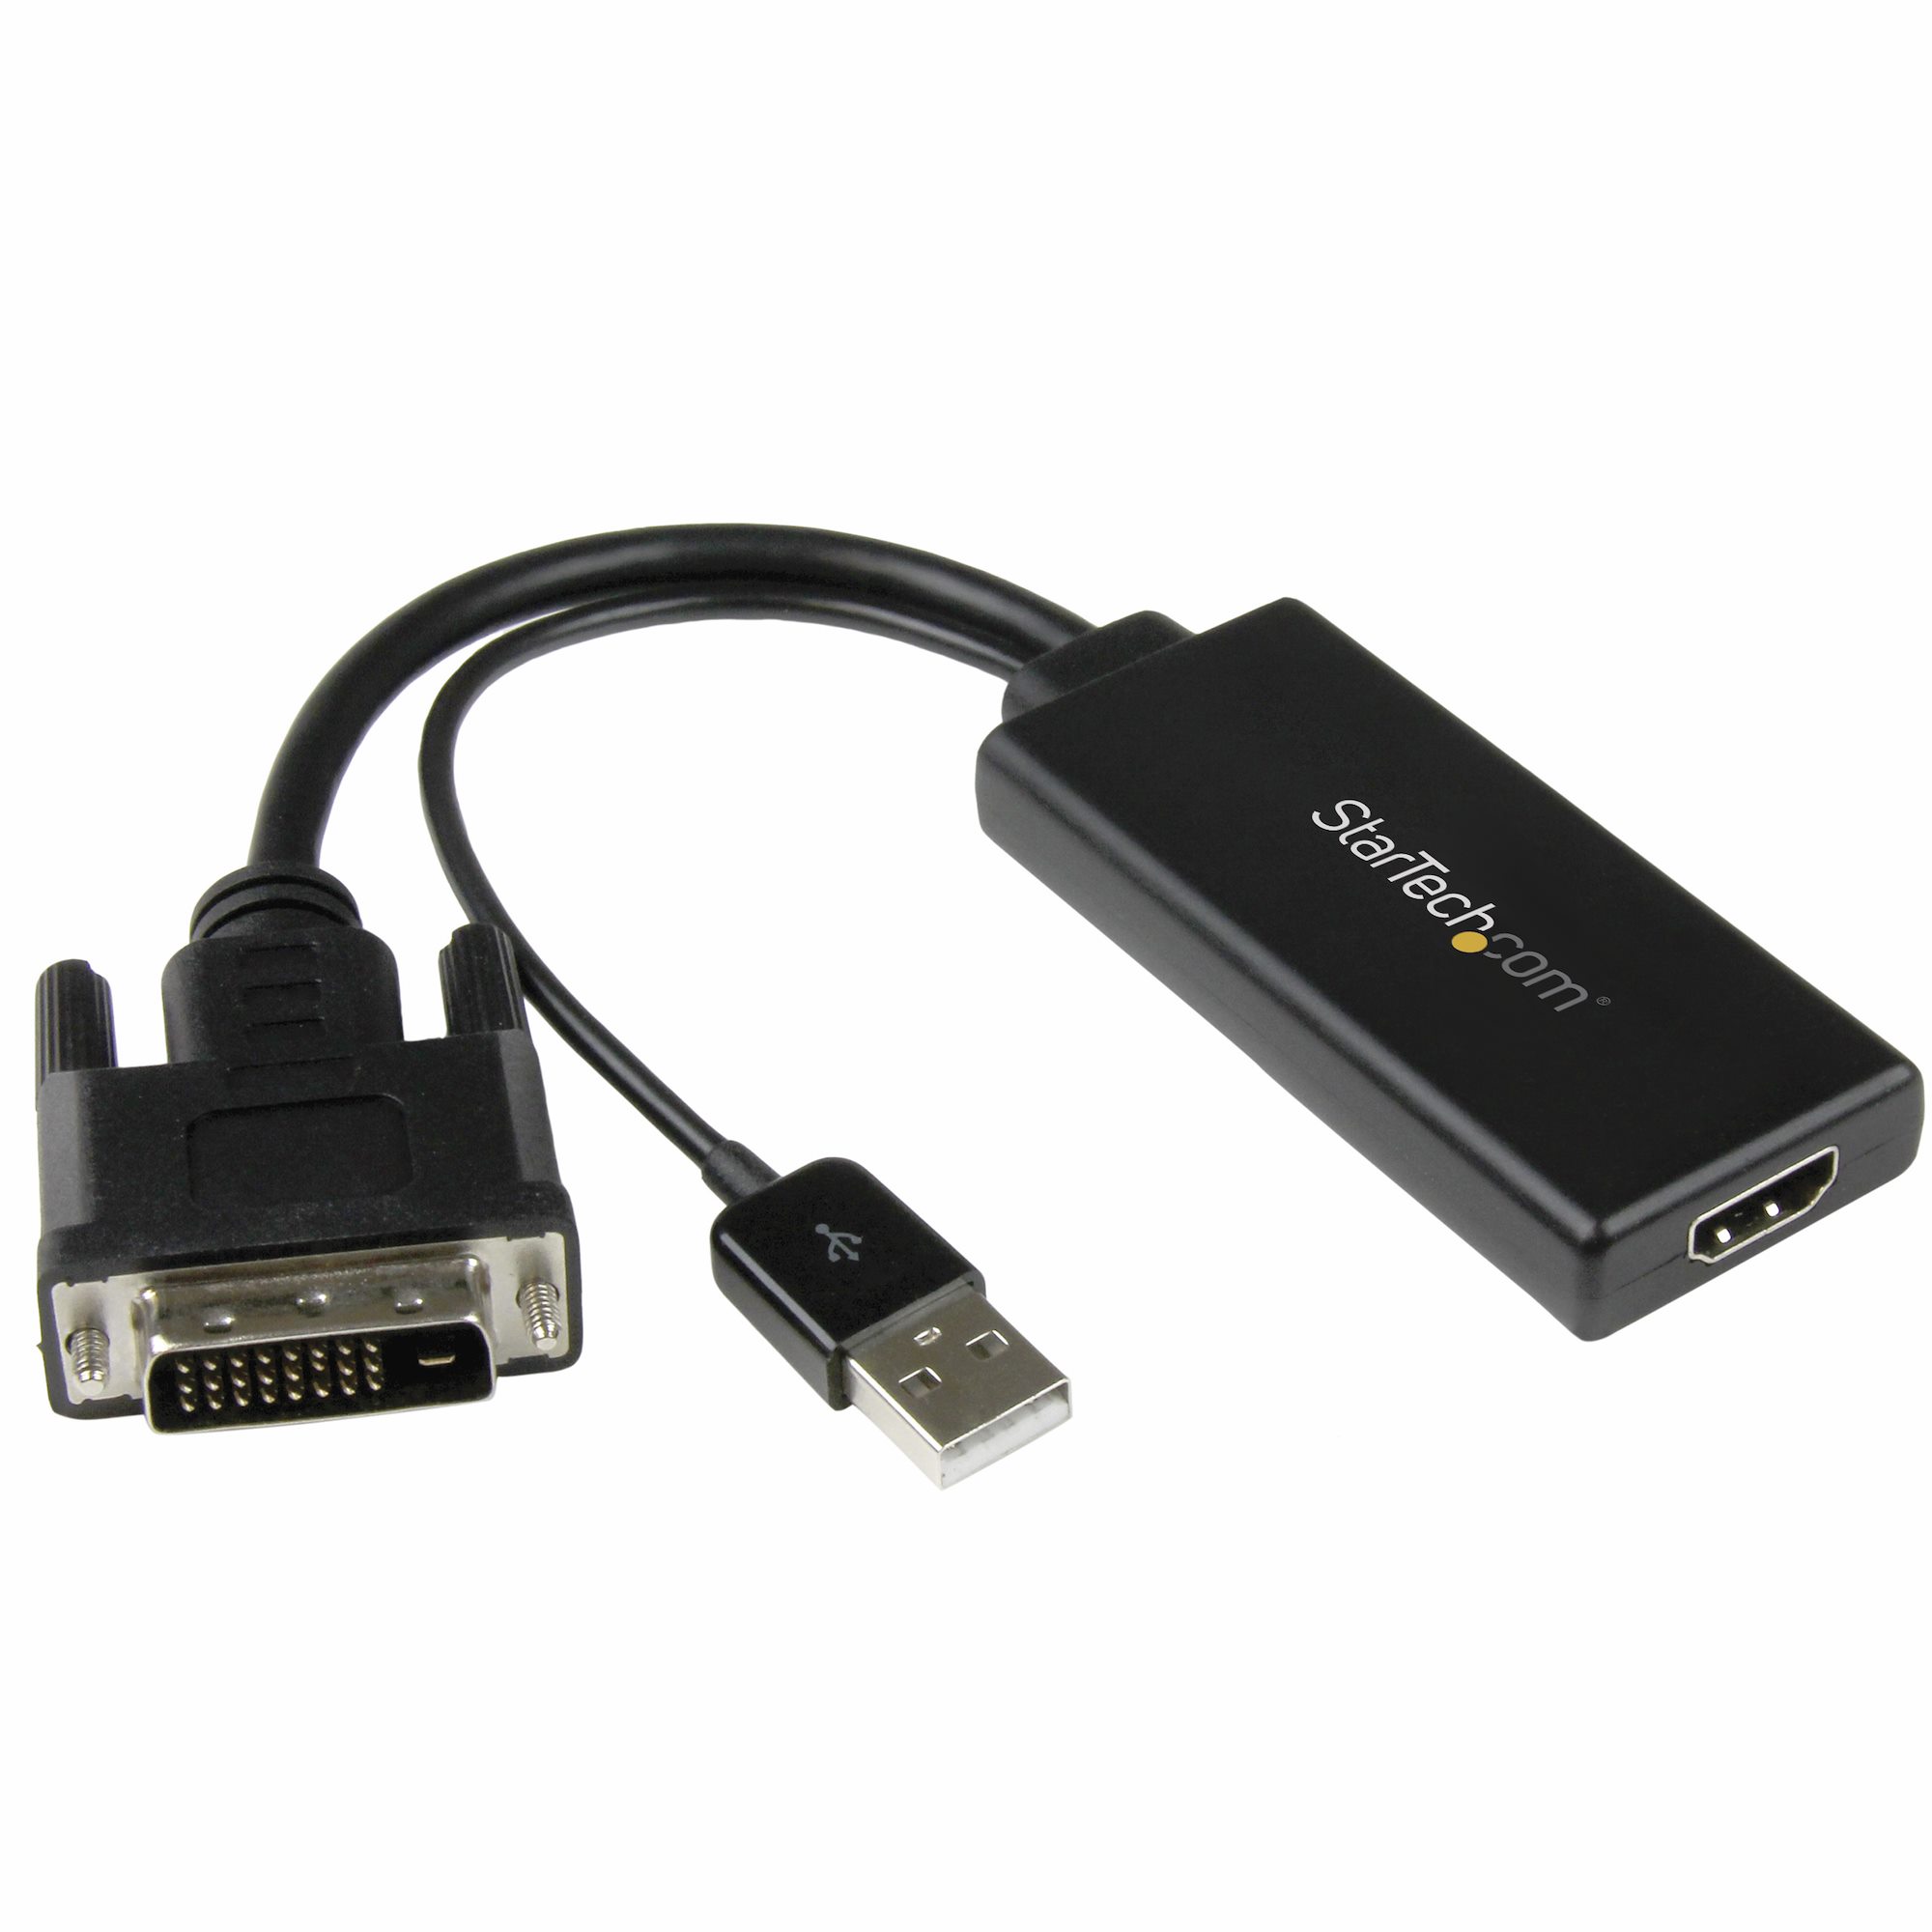 afsnit Ulykke Ligegyldighed DVI to HDMI Adapter - USB Power & Audio - HDMI & DVI Display Adapters |  StarTech.com